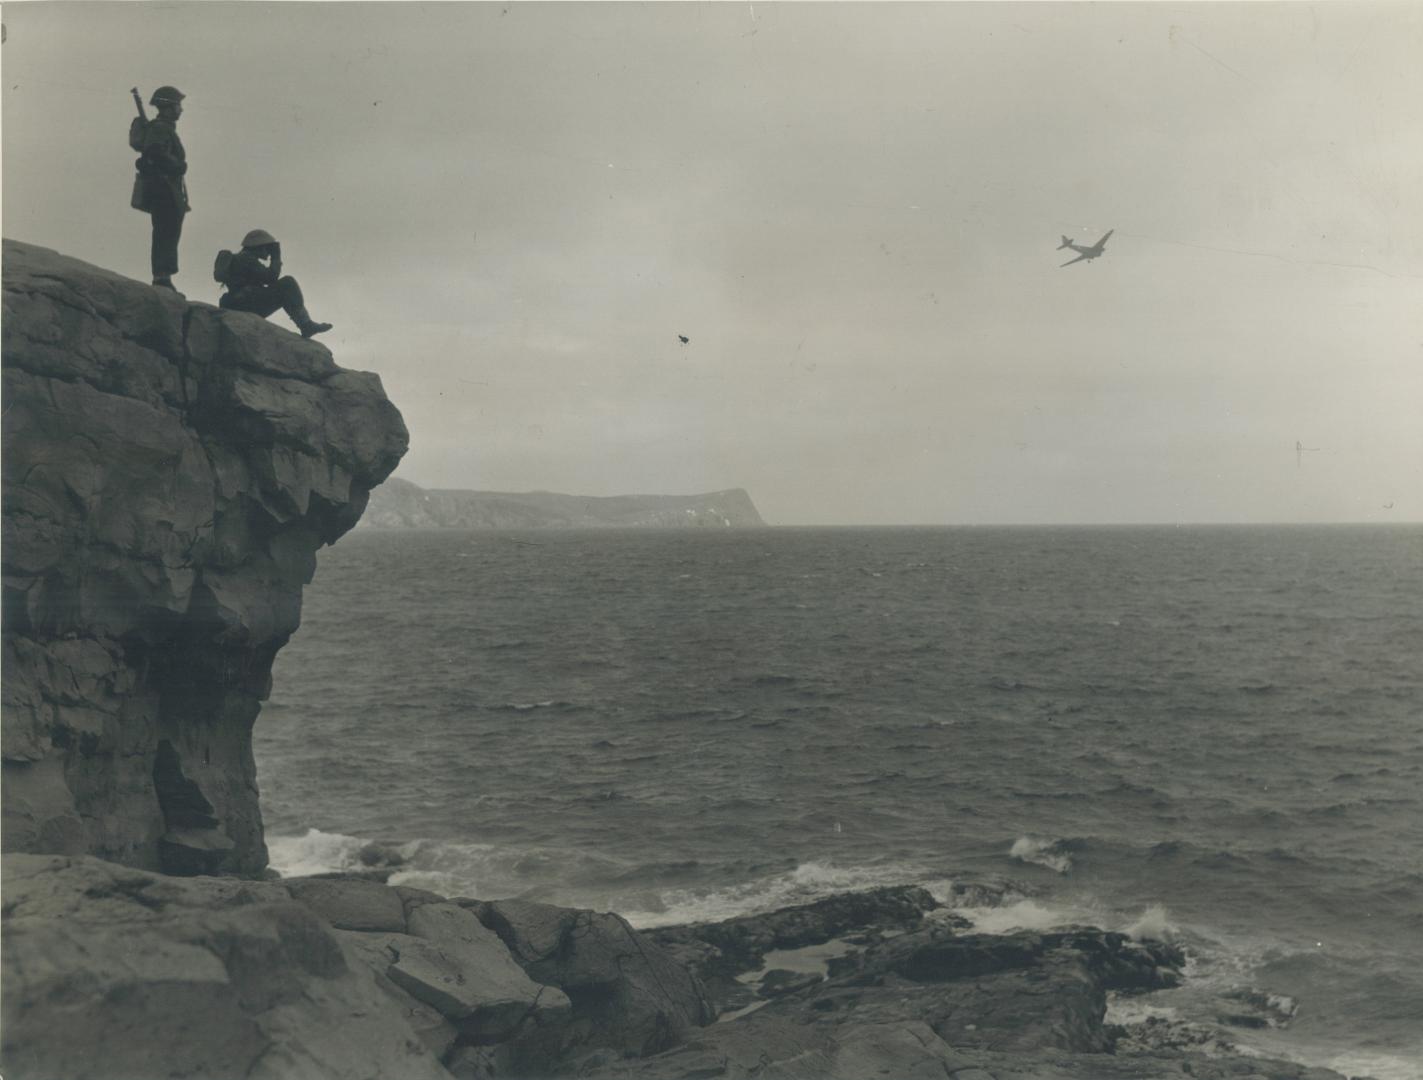 On a precipitous clift, to the right, members of the Canadian garrison watch a plane swoop in from a search for U-boats